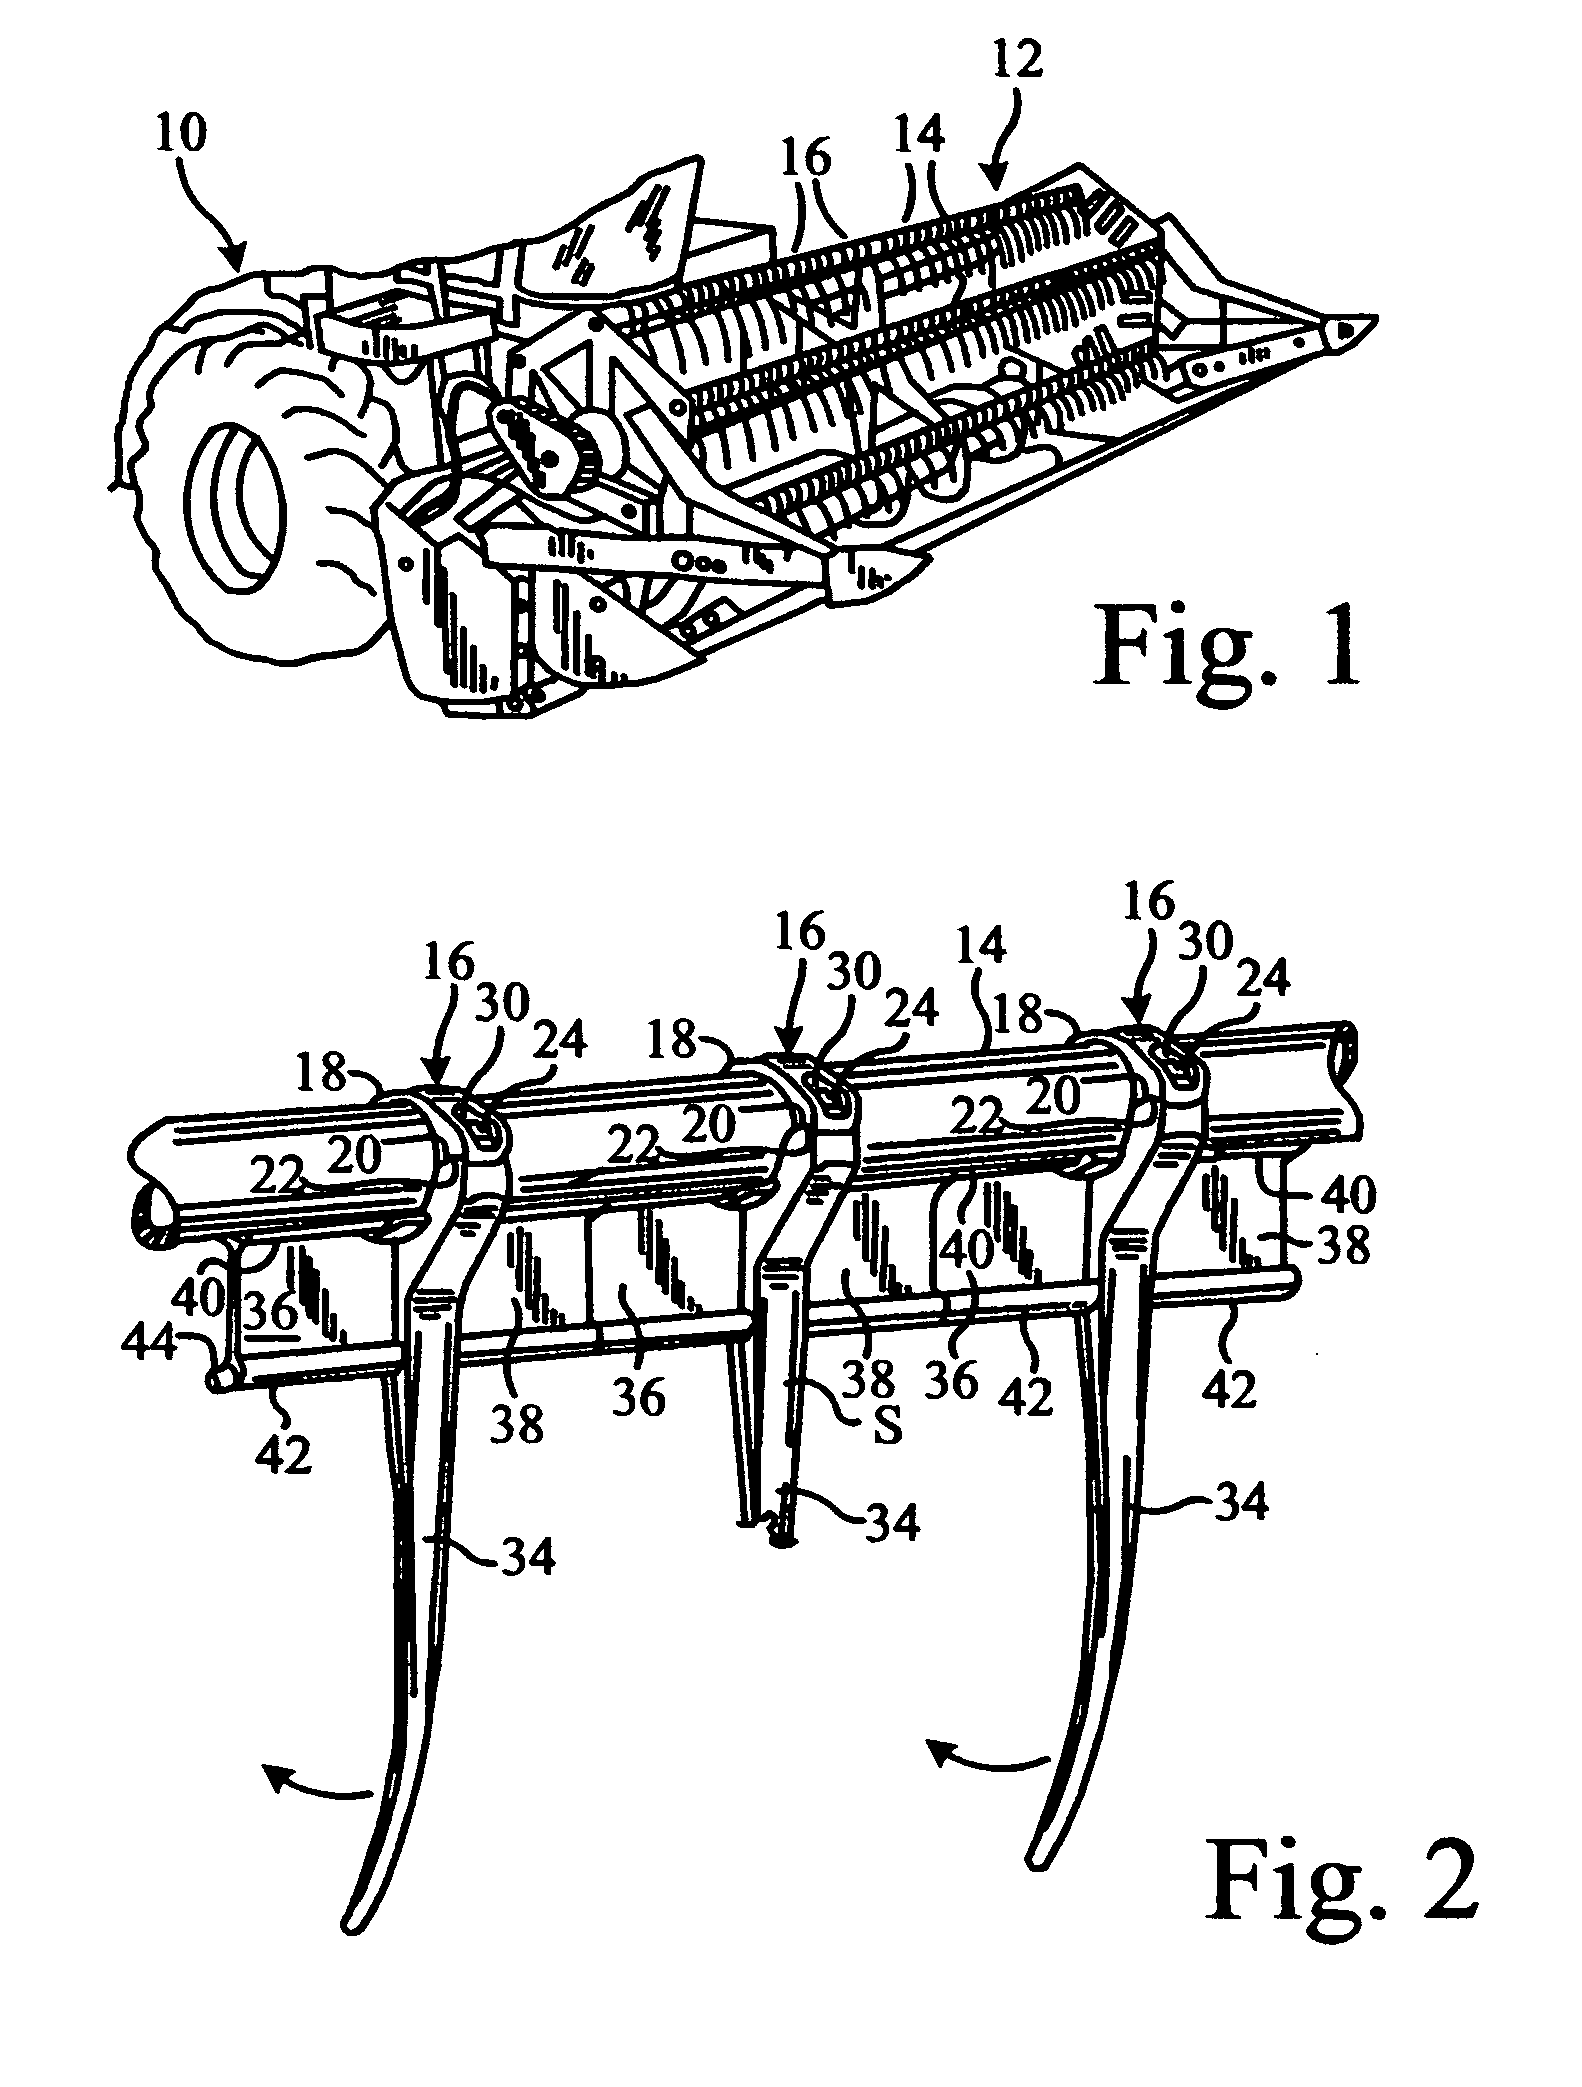 Multi-prong conversion tine for a harvester reel and method